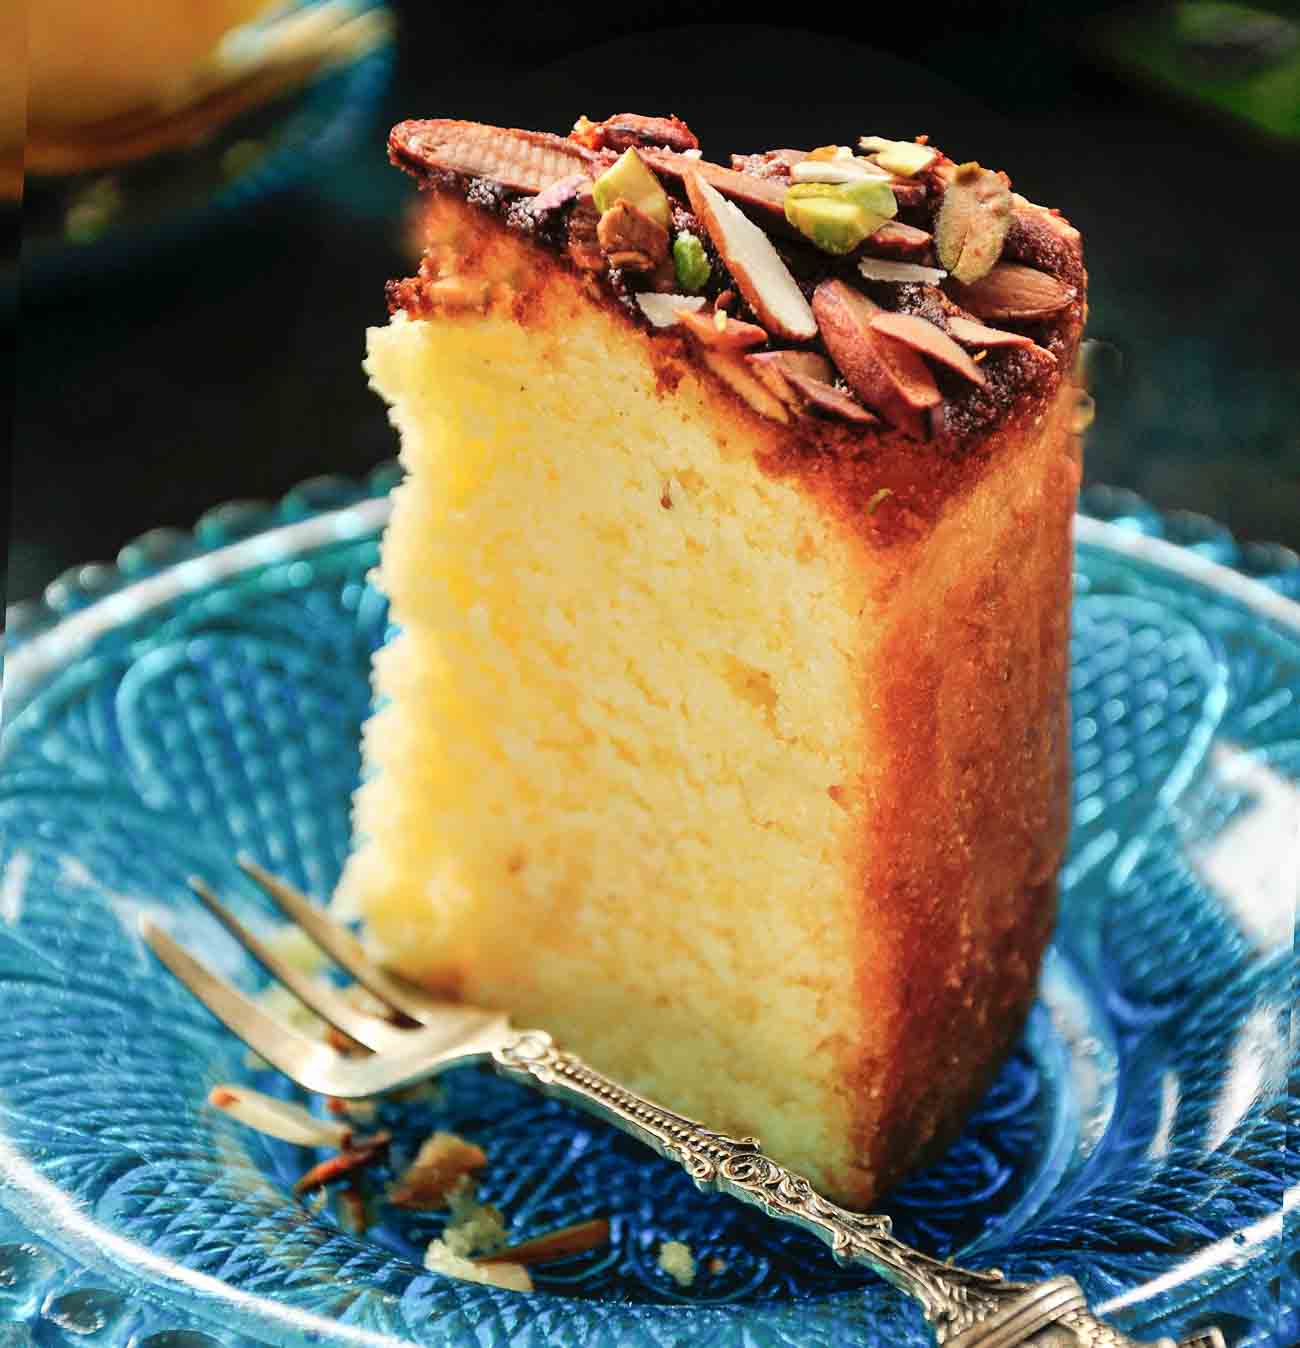 The mawa cake has a long legacy associated with it and is one of the bestsellers at Merwans